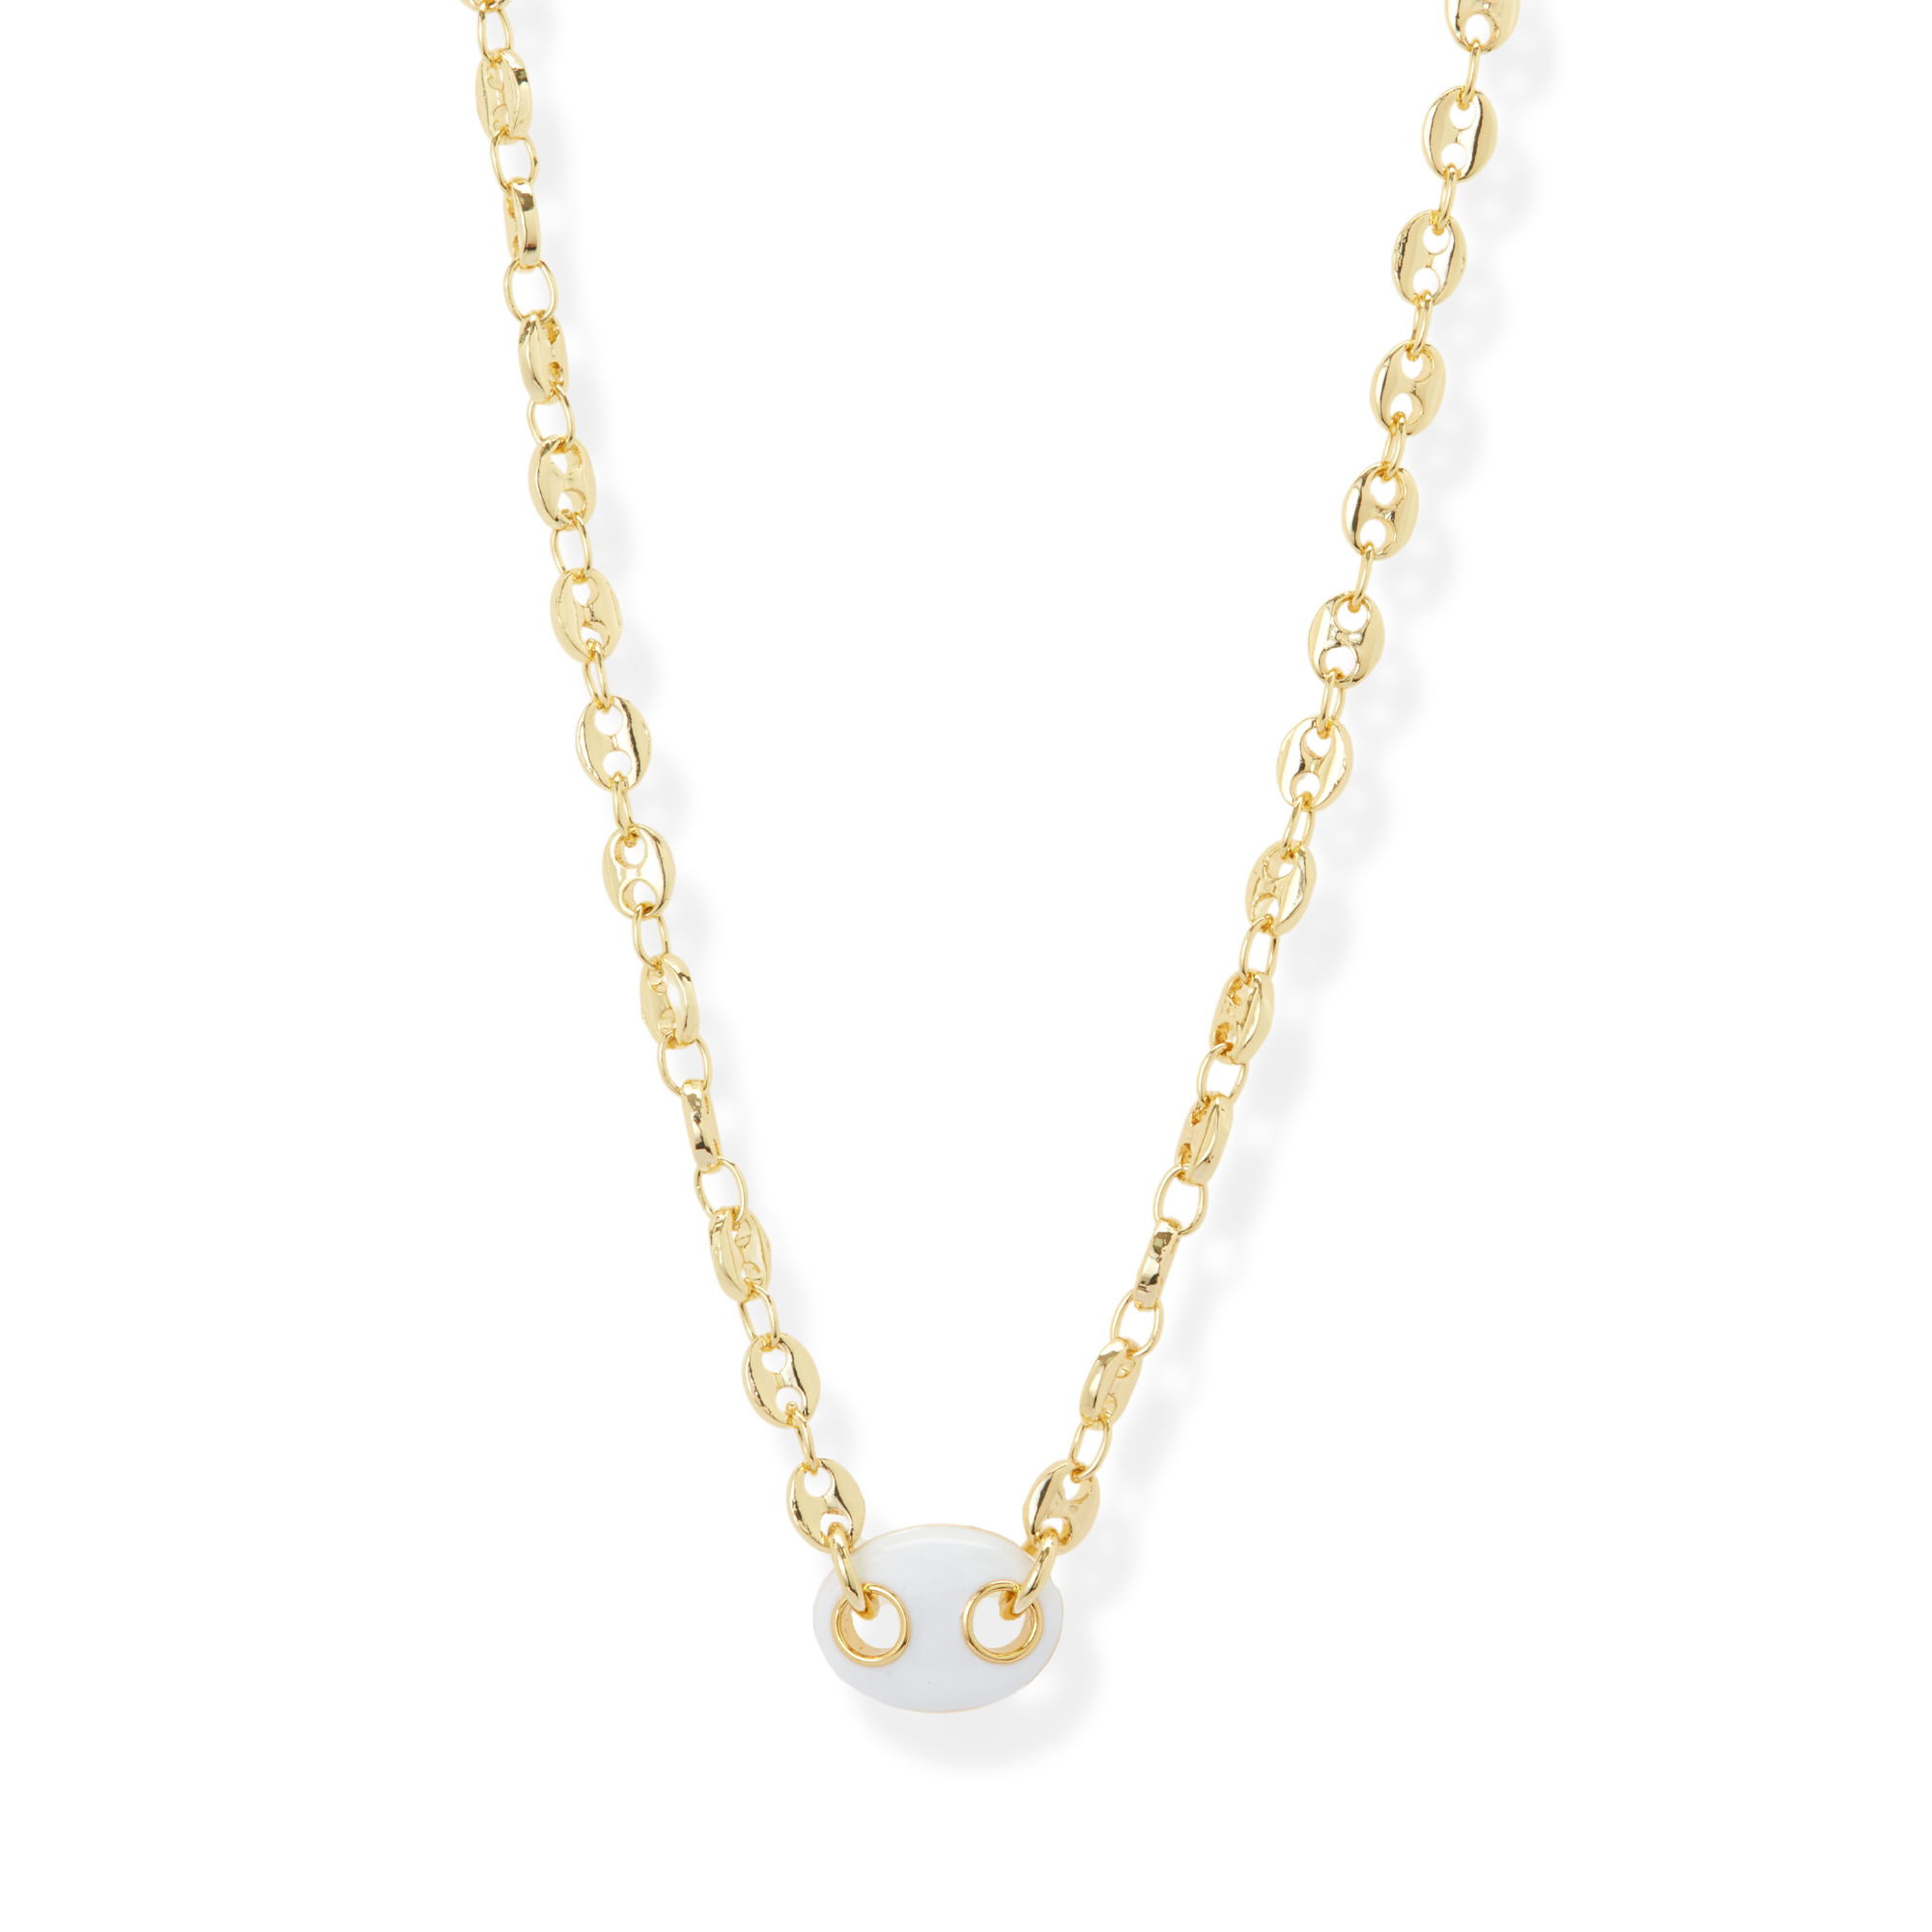 THE WHITE ENAMEL MARINER CHAIN NECKLACE